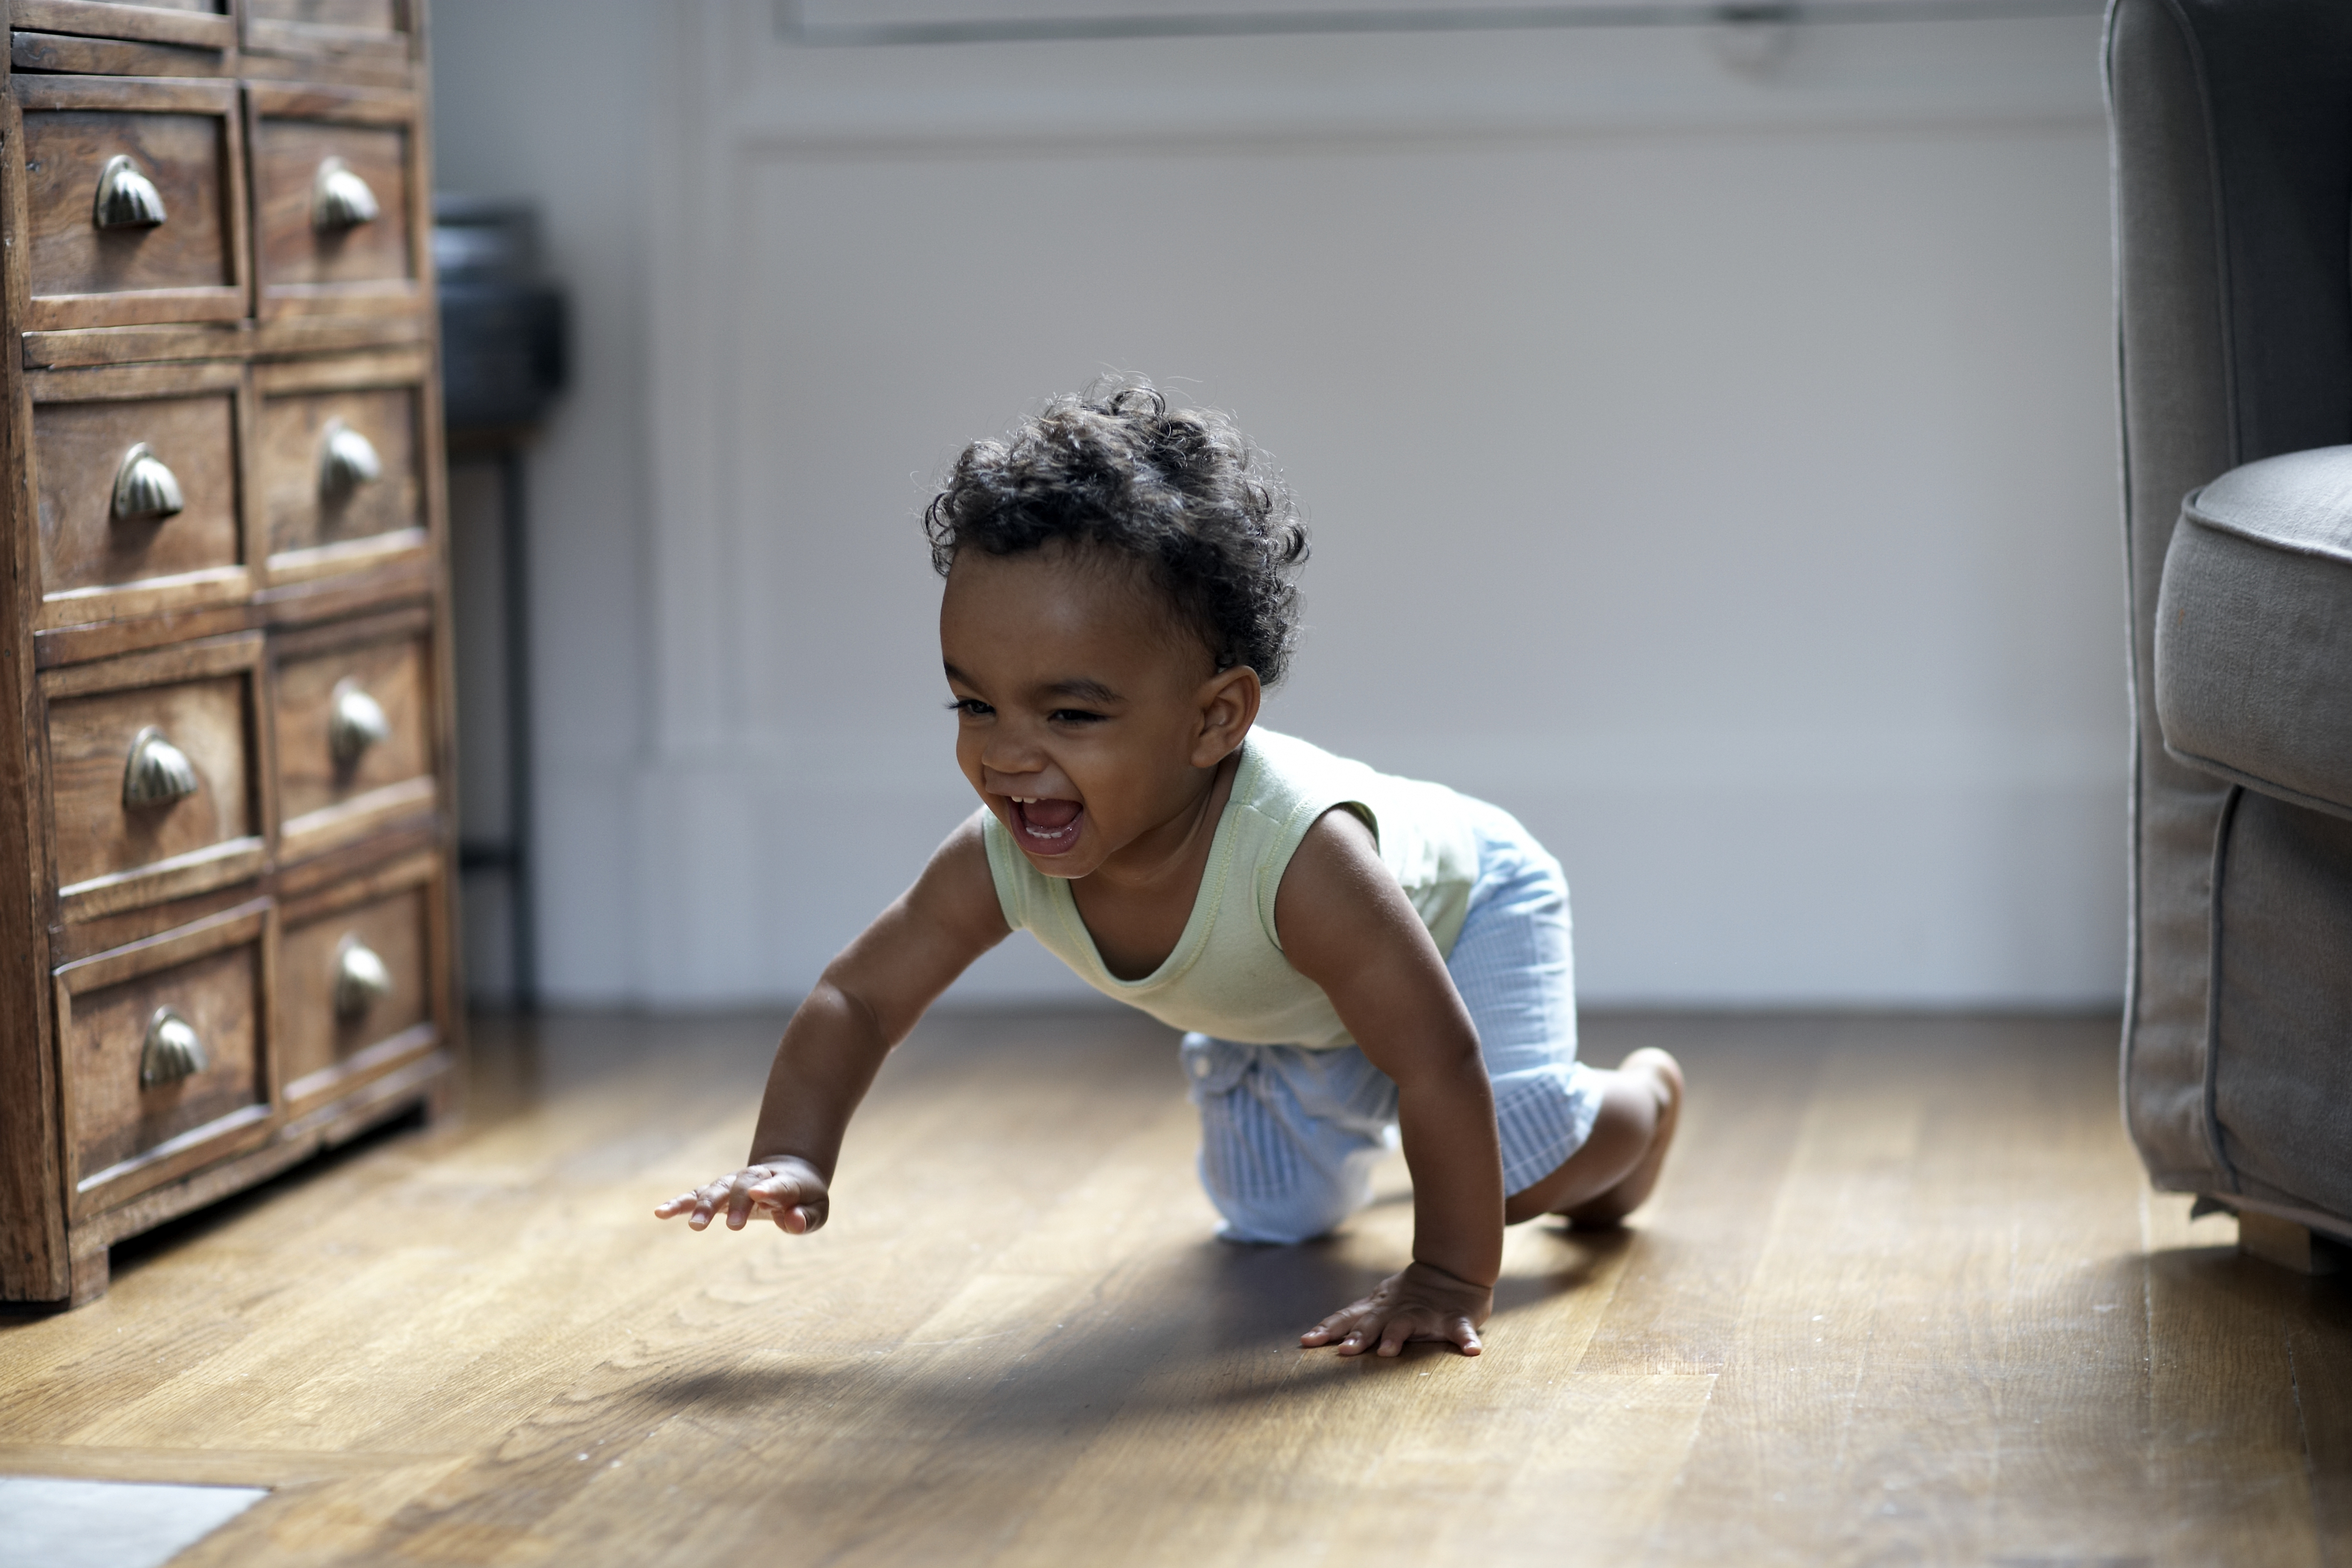 A joyful baby crawls on a wooden floor in a well-lit room, smiling and reaching forward